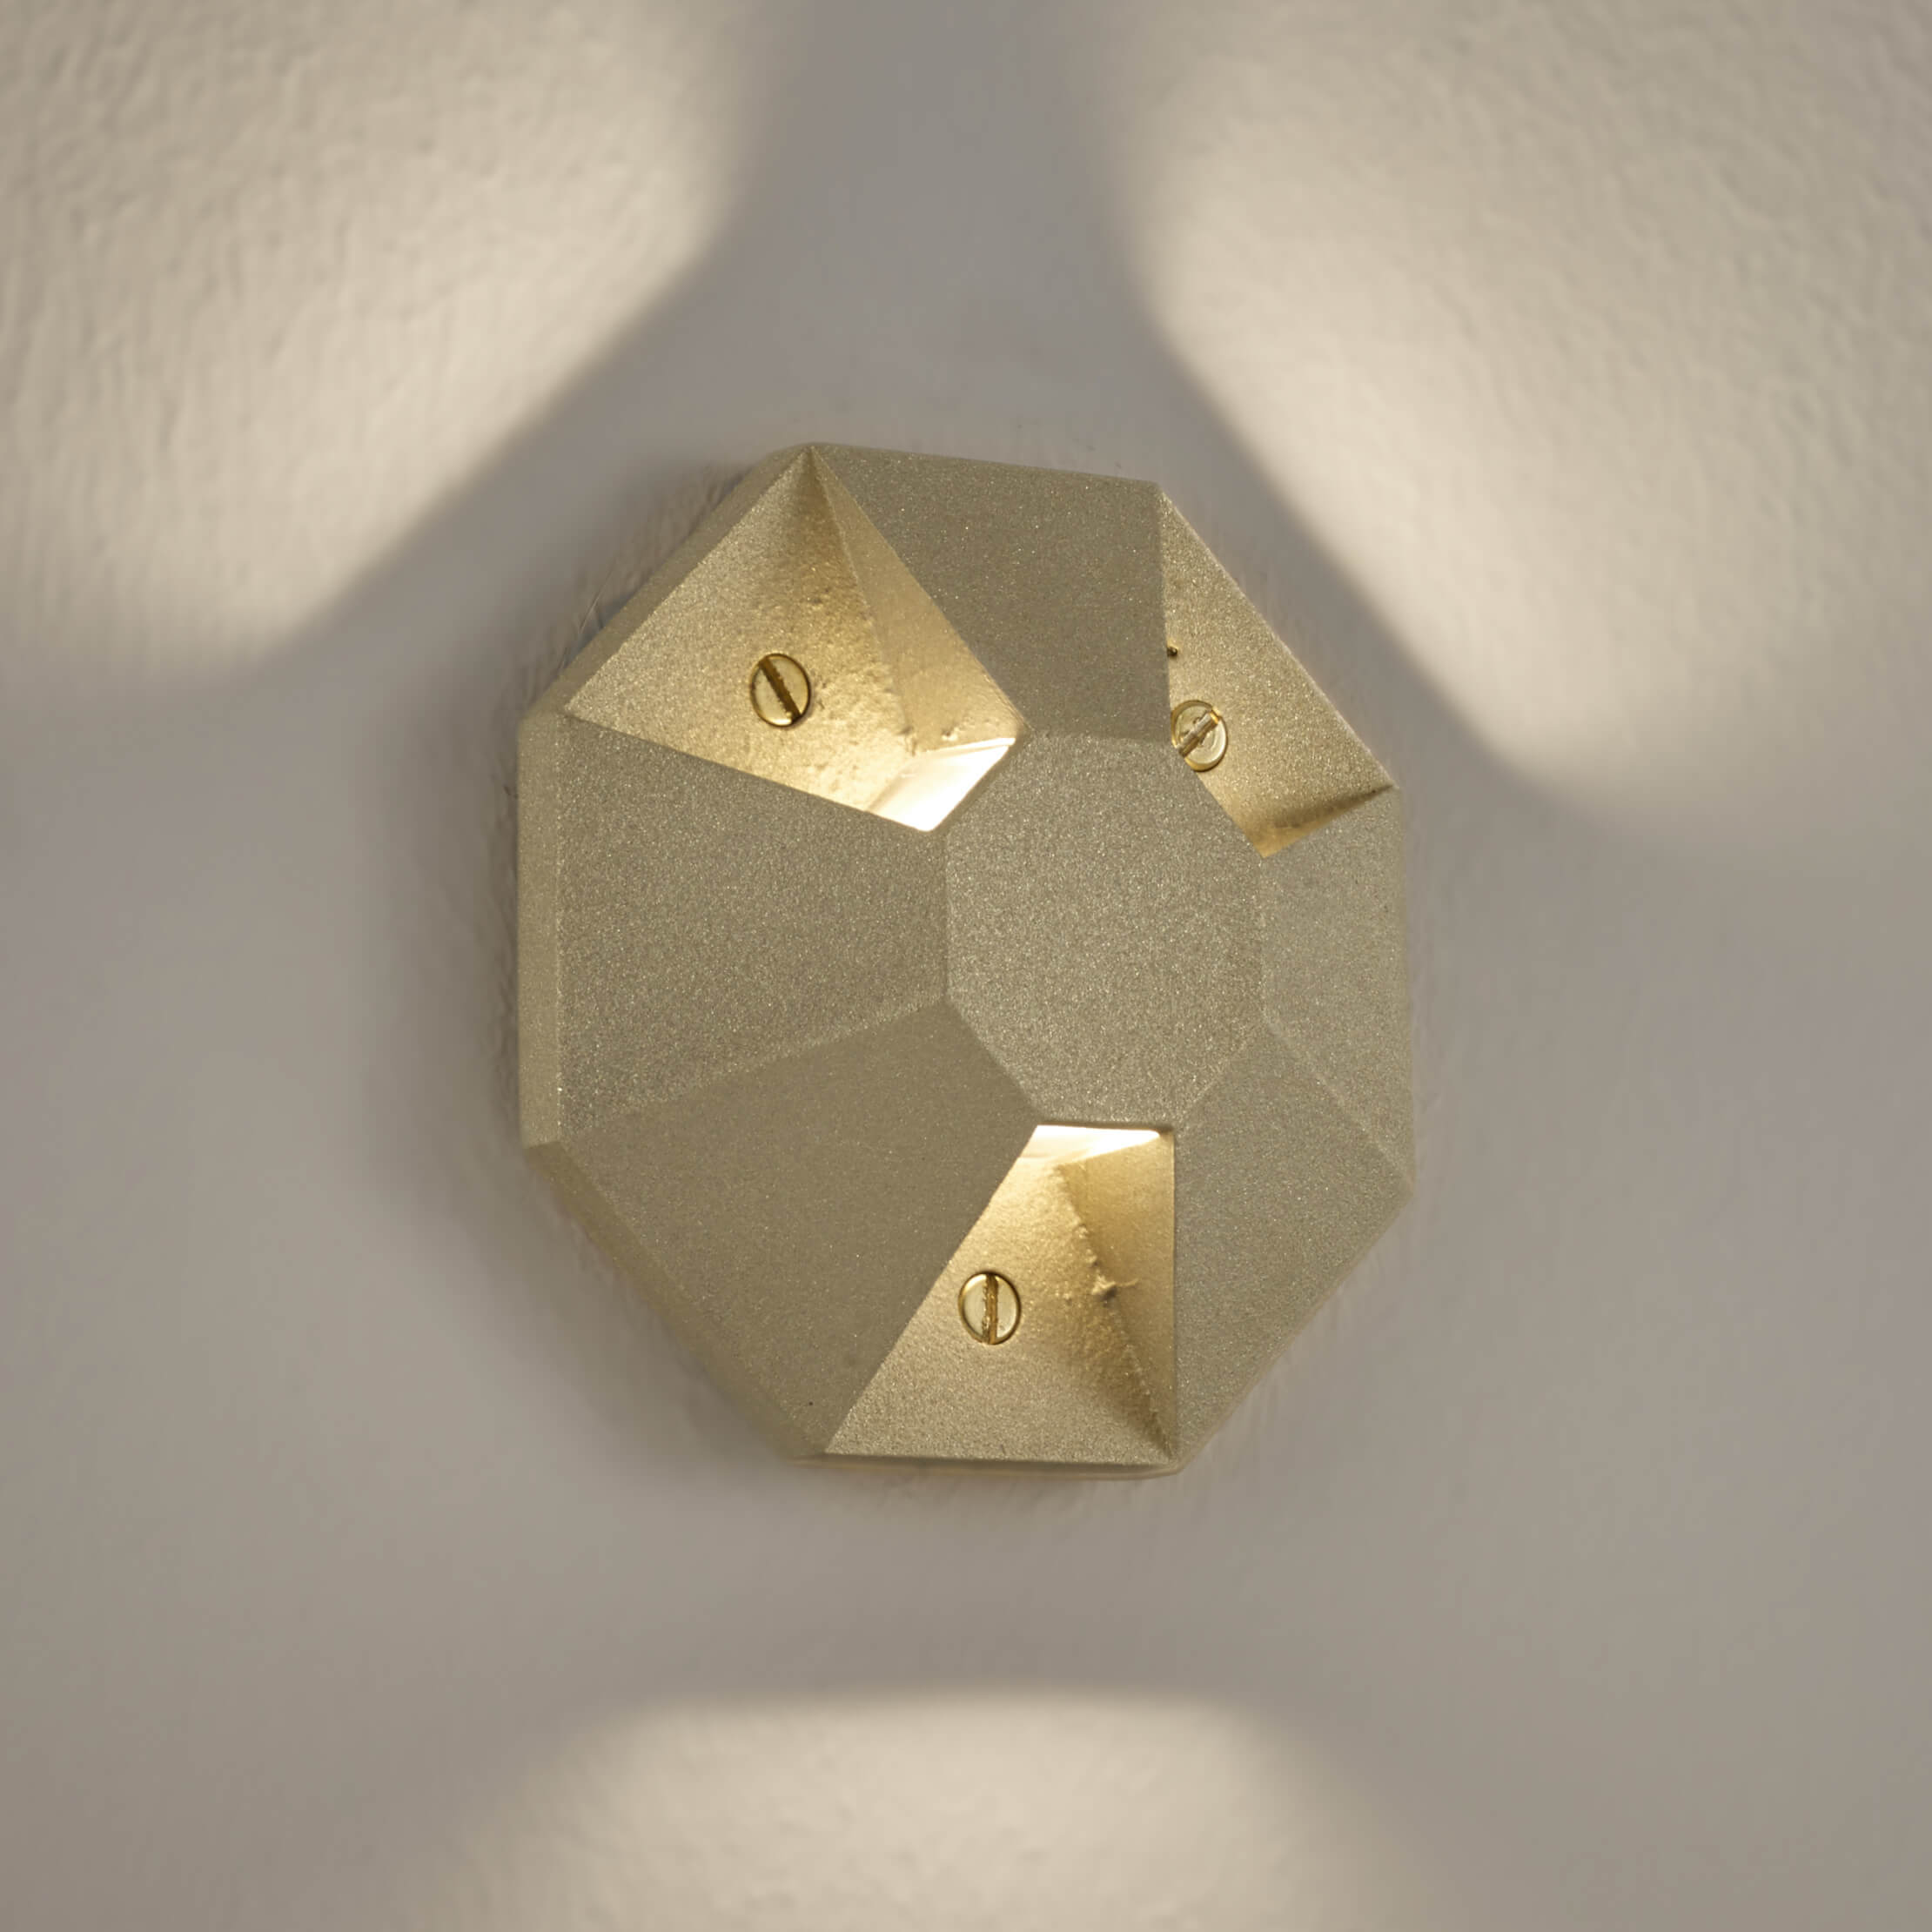 Wall washer OCTO made of cast brass with 3 apertures